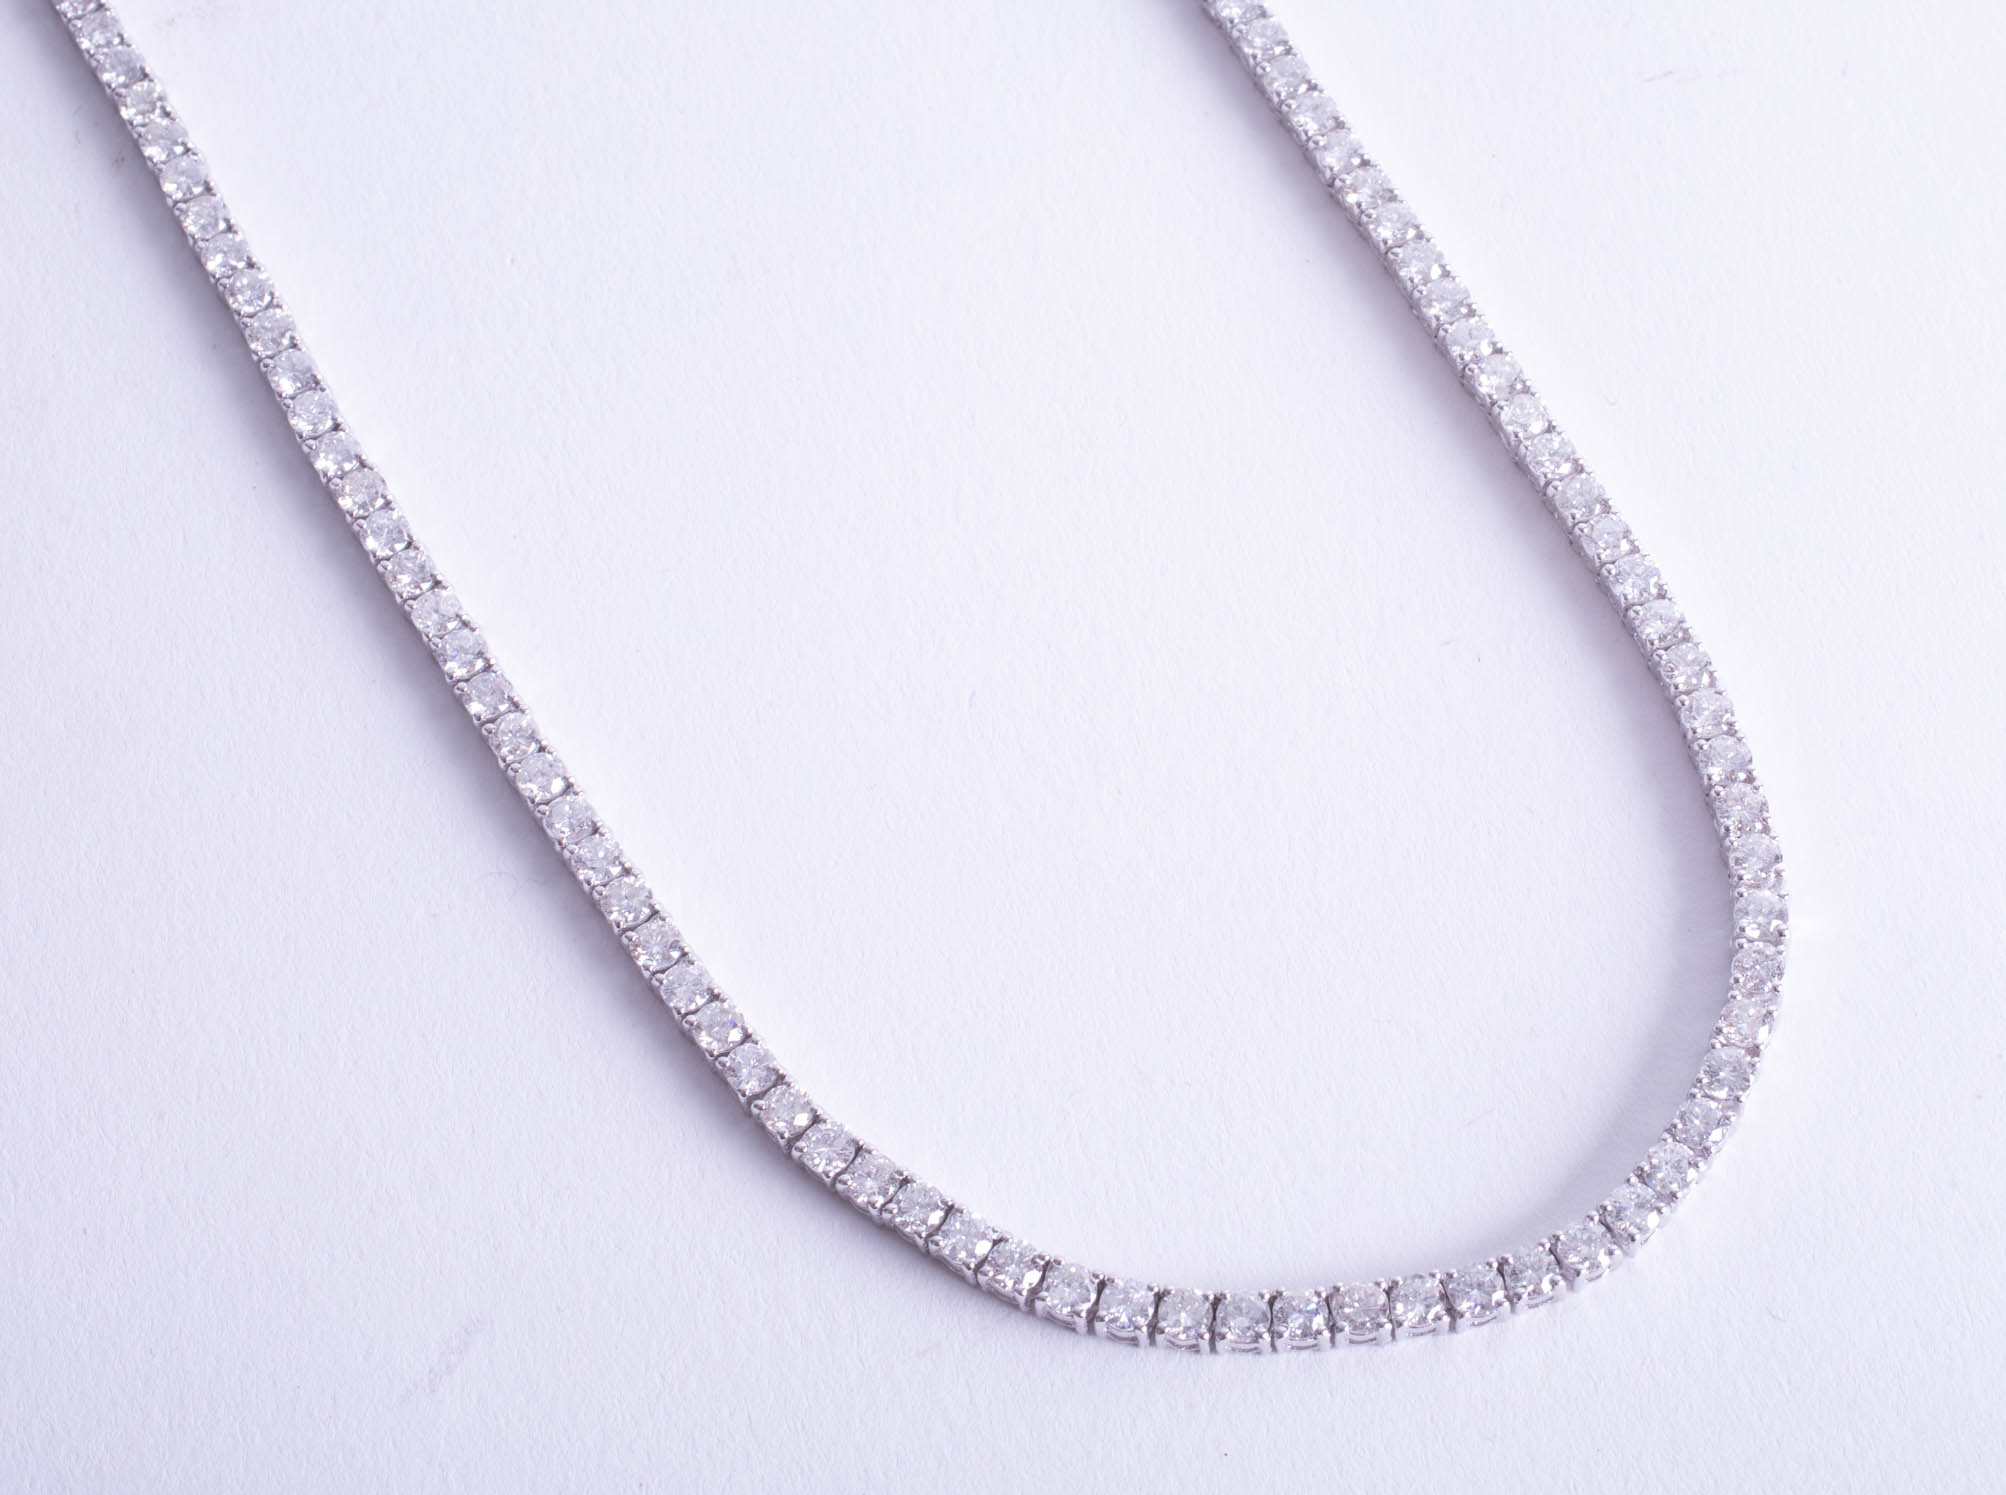 A stunning 18ct white gold necklace set with 155 diamonds, weight approx 18.30ct.